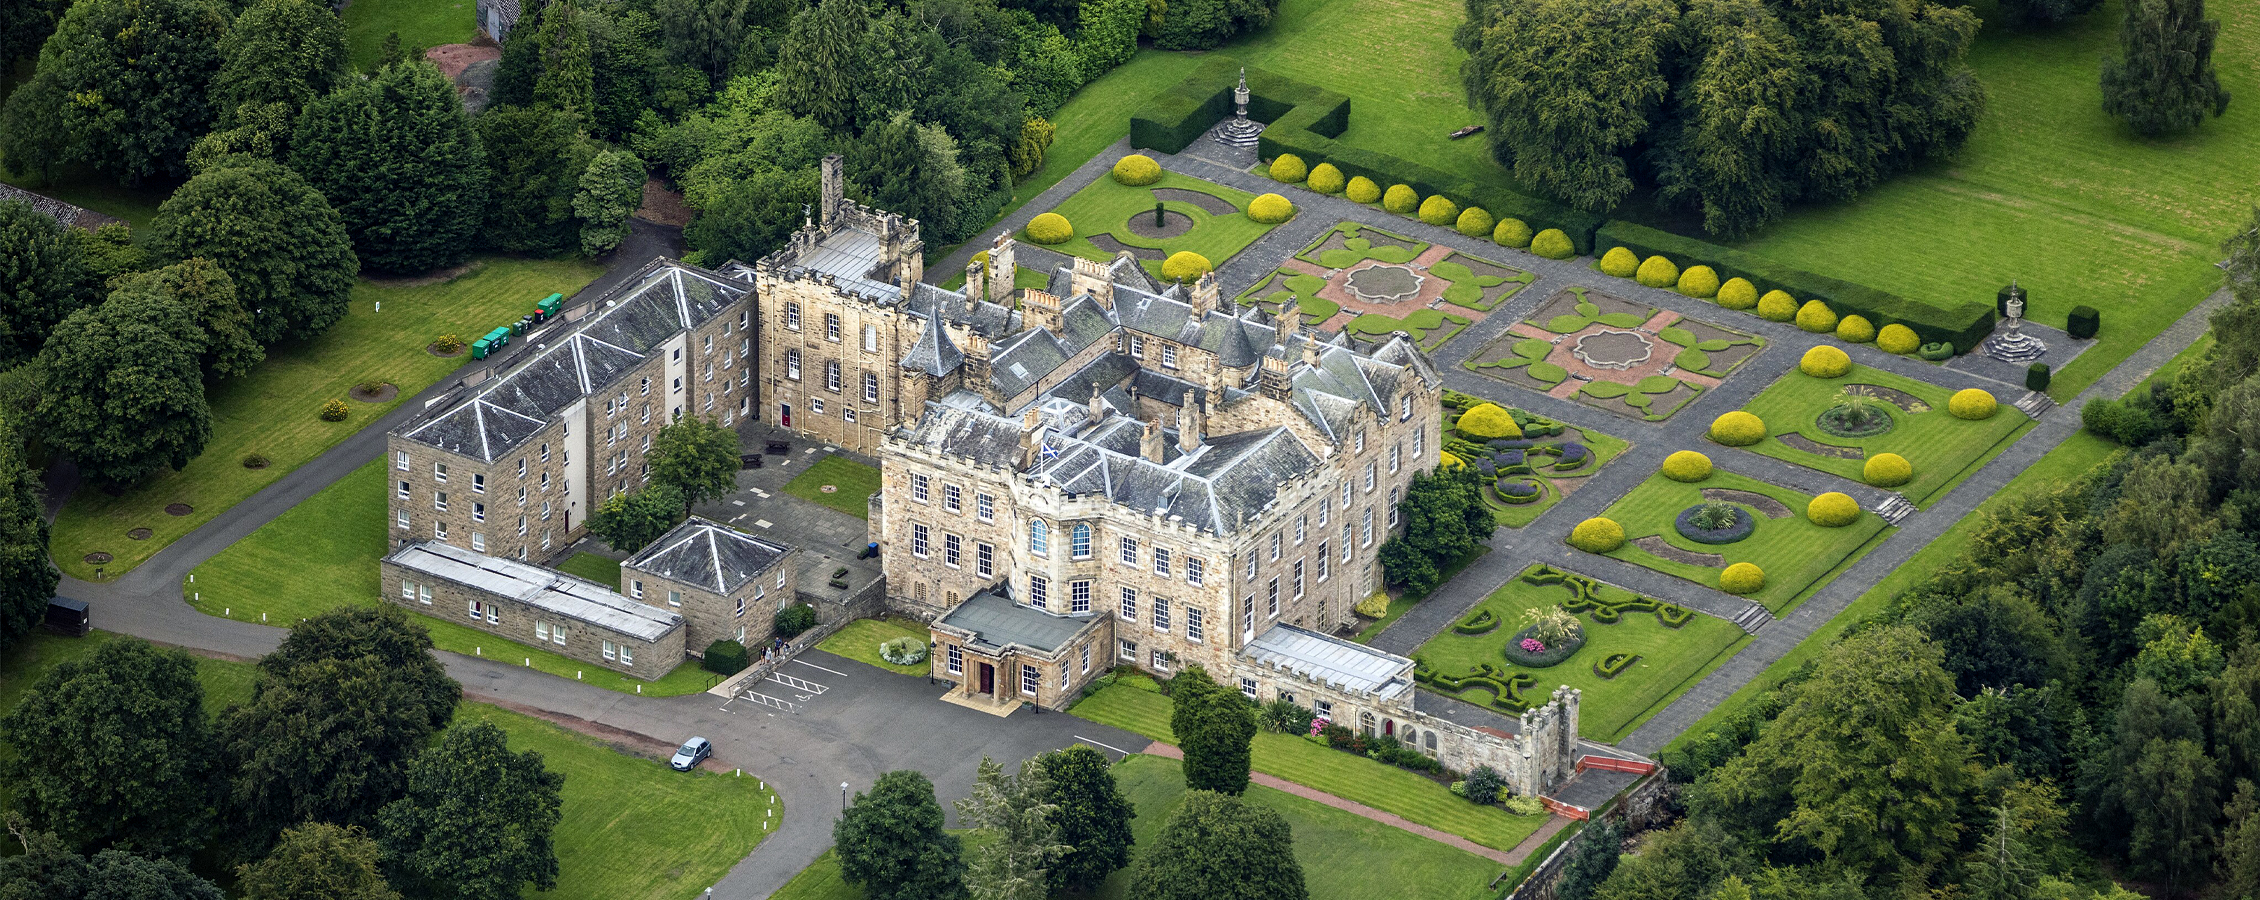 A photo of Dalkeith Palace, a sprawling three story castle with a stone exterior.